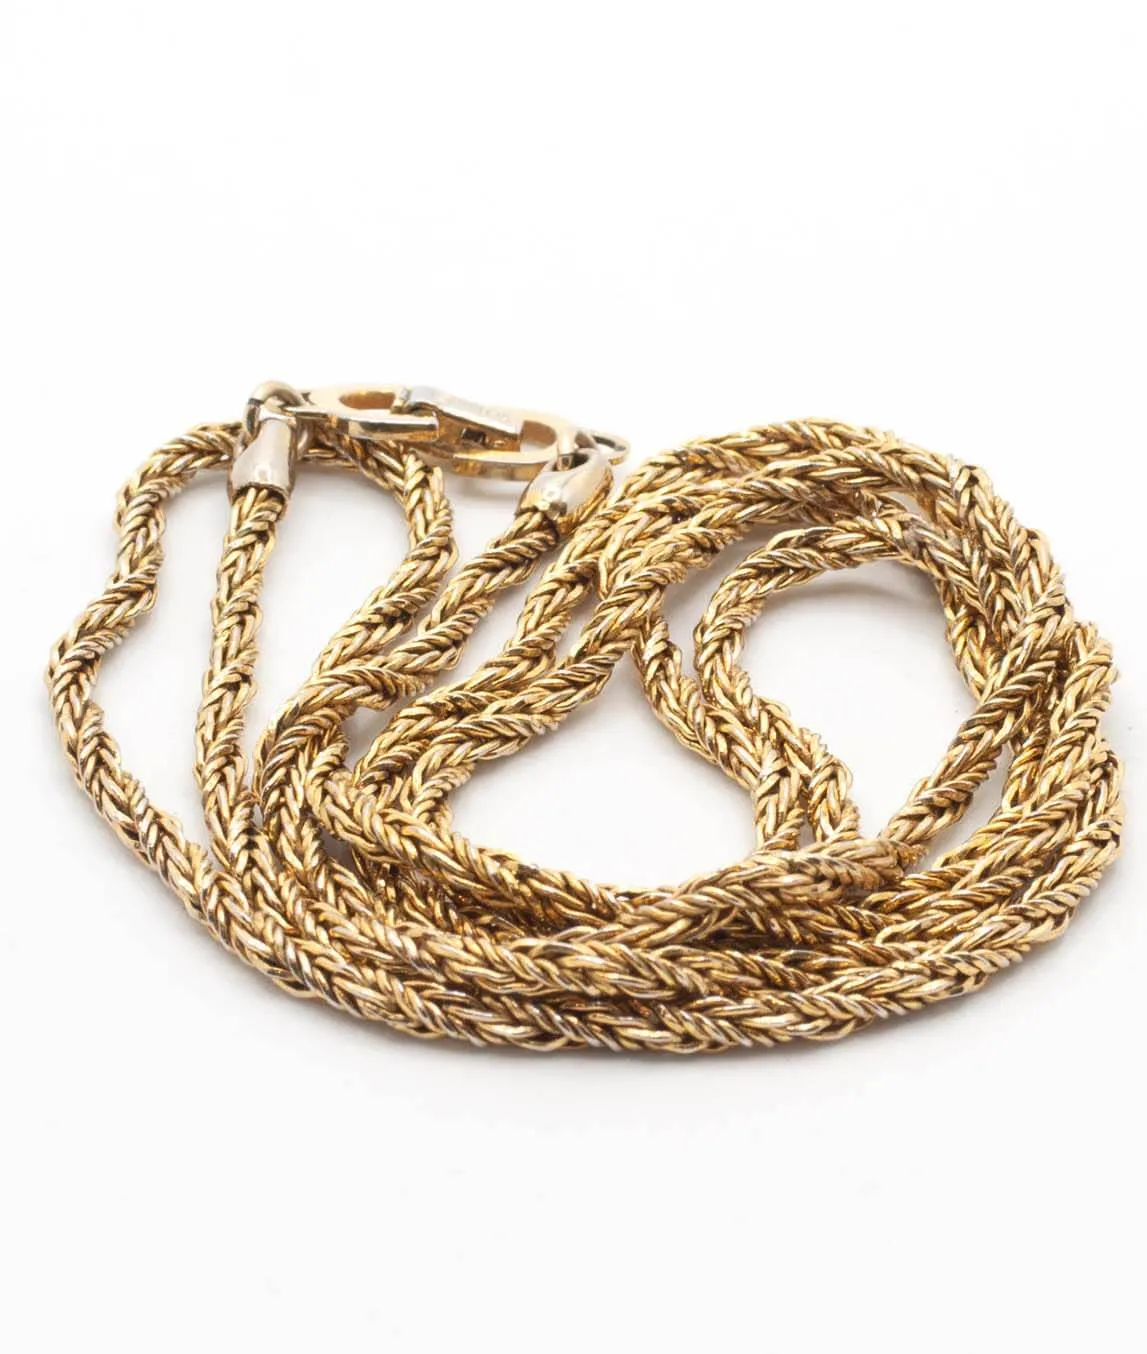 Vintage Christian Dior twisted rope chain necklace